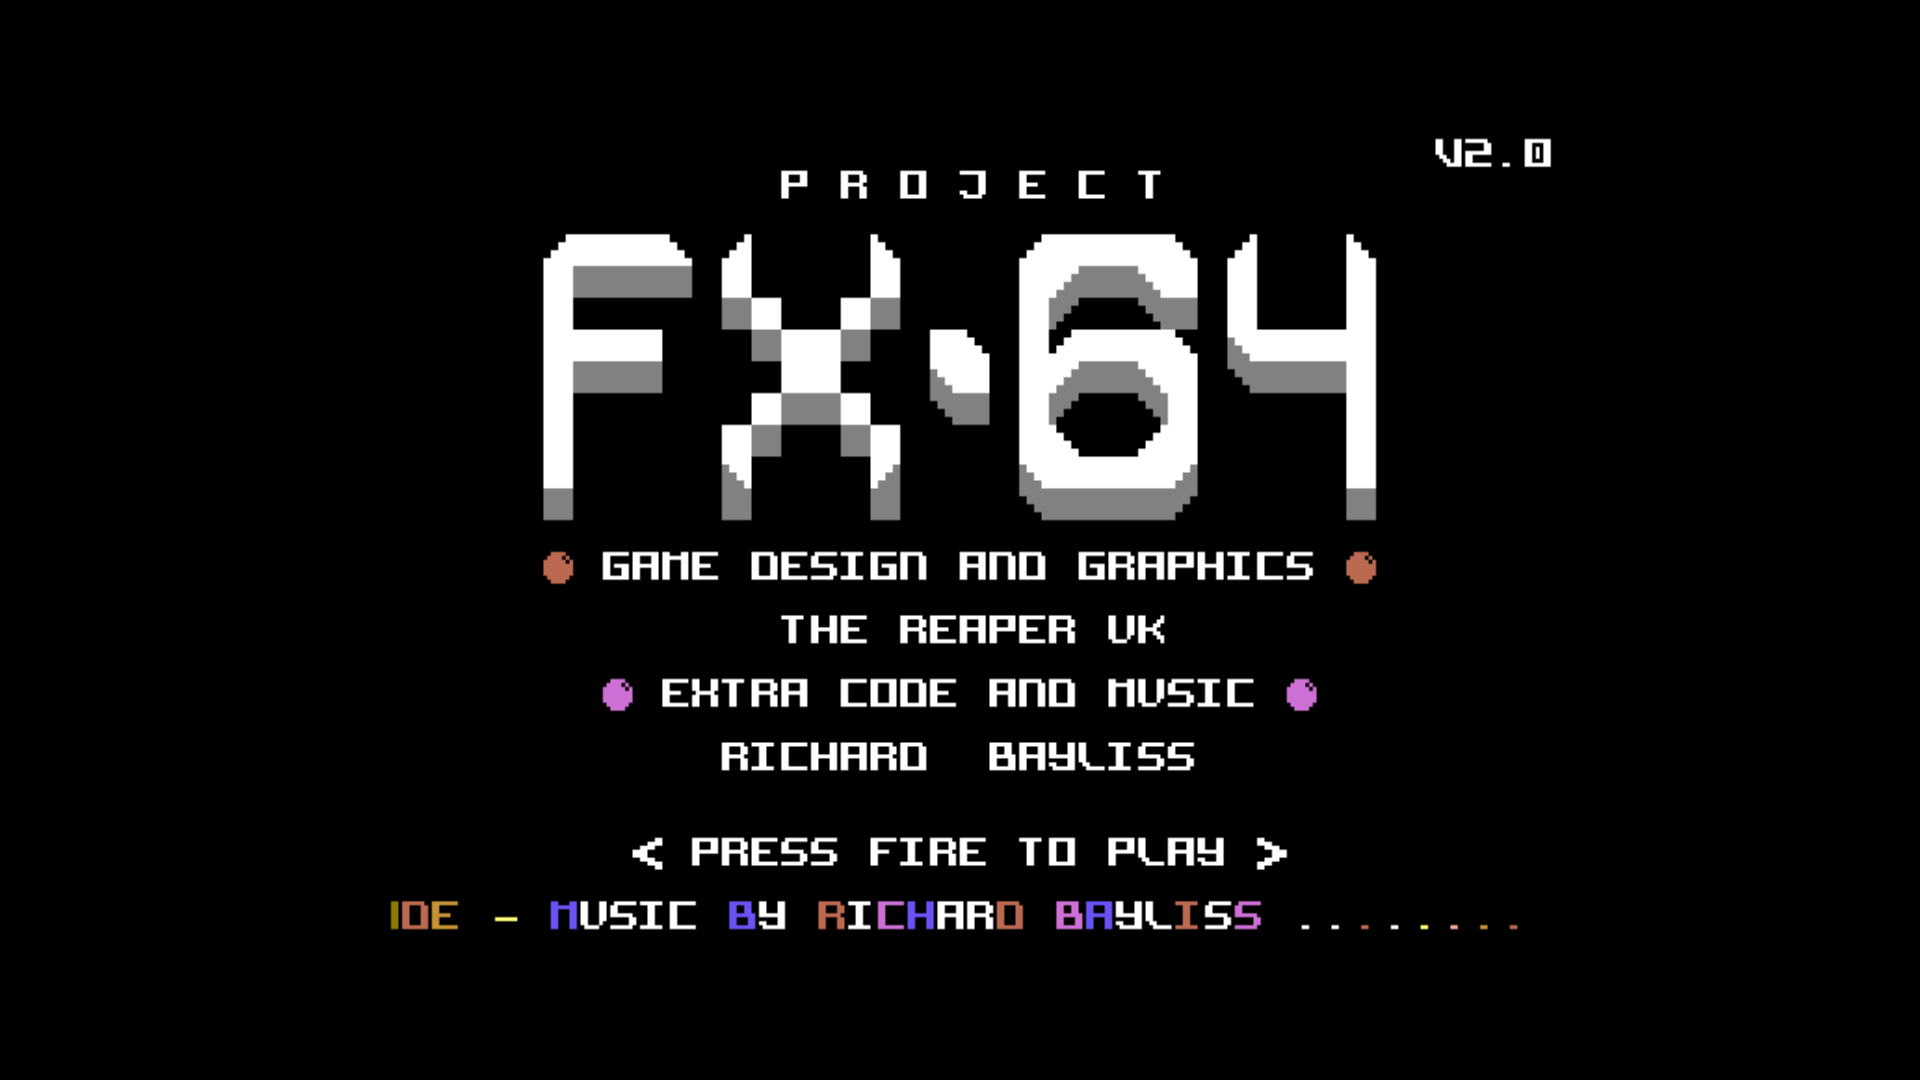 Project FX-64 (C64)